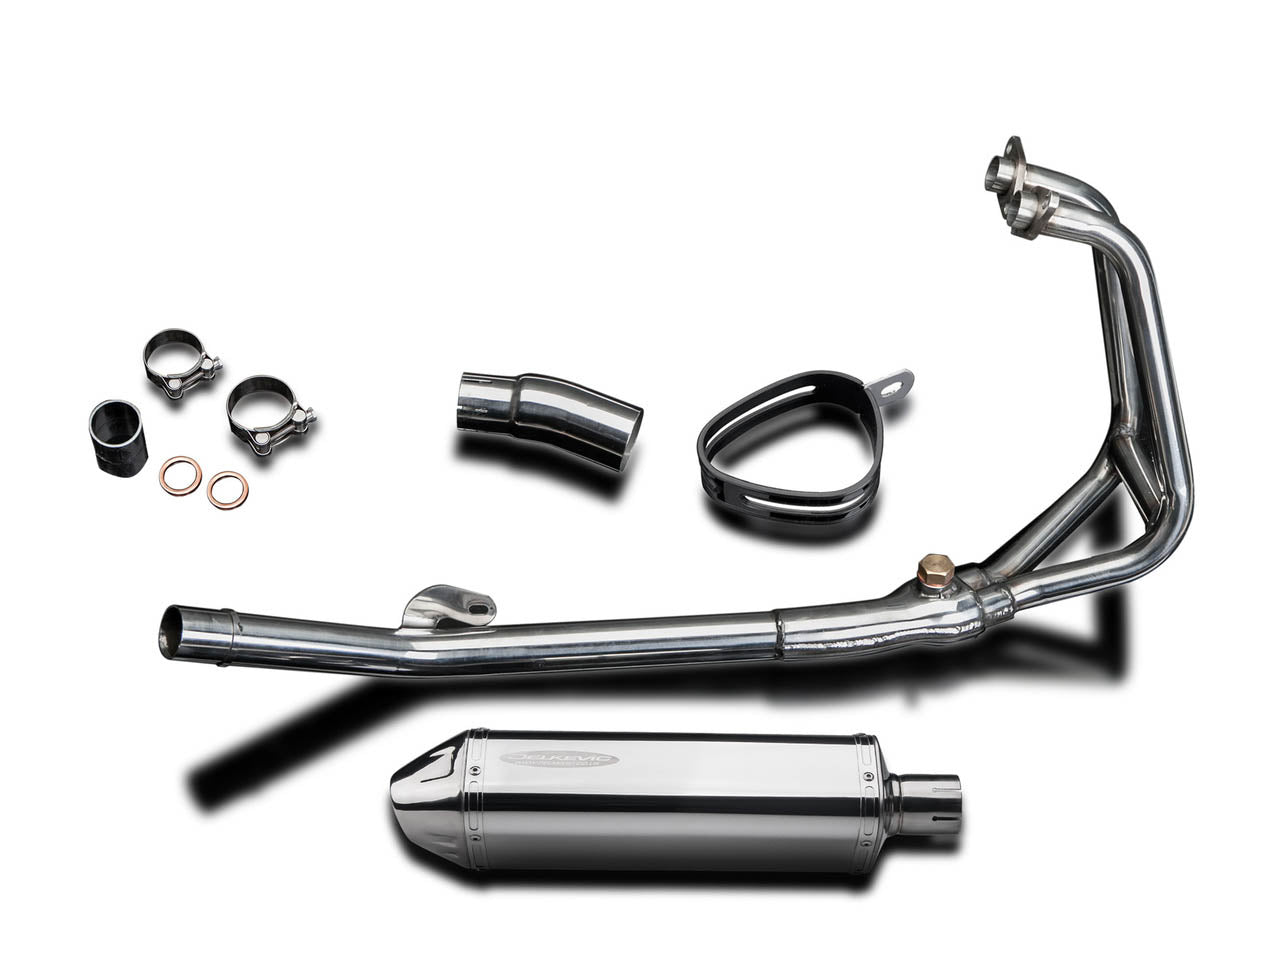 DELKEVIC Kawasaki Ninja 250R (11/13) Full Exhaust System with 13" Tri-Oval Silencer